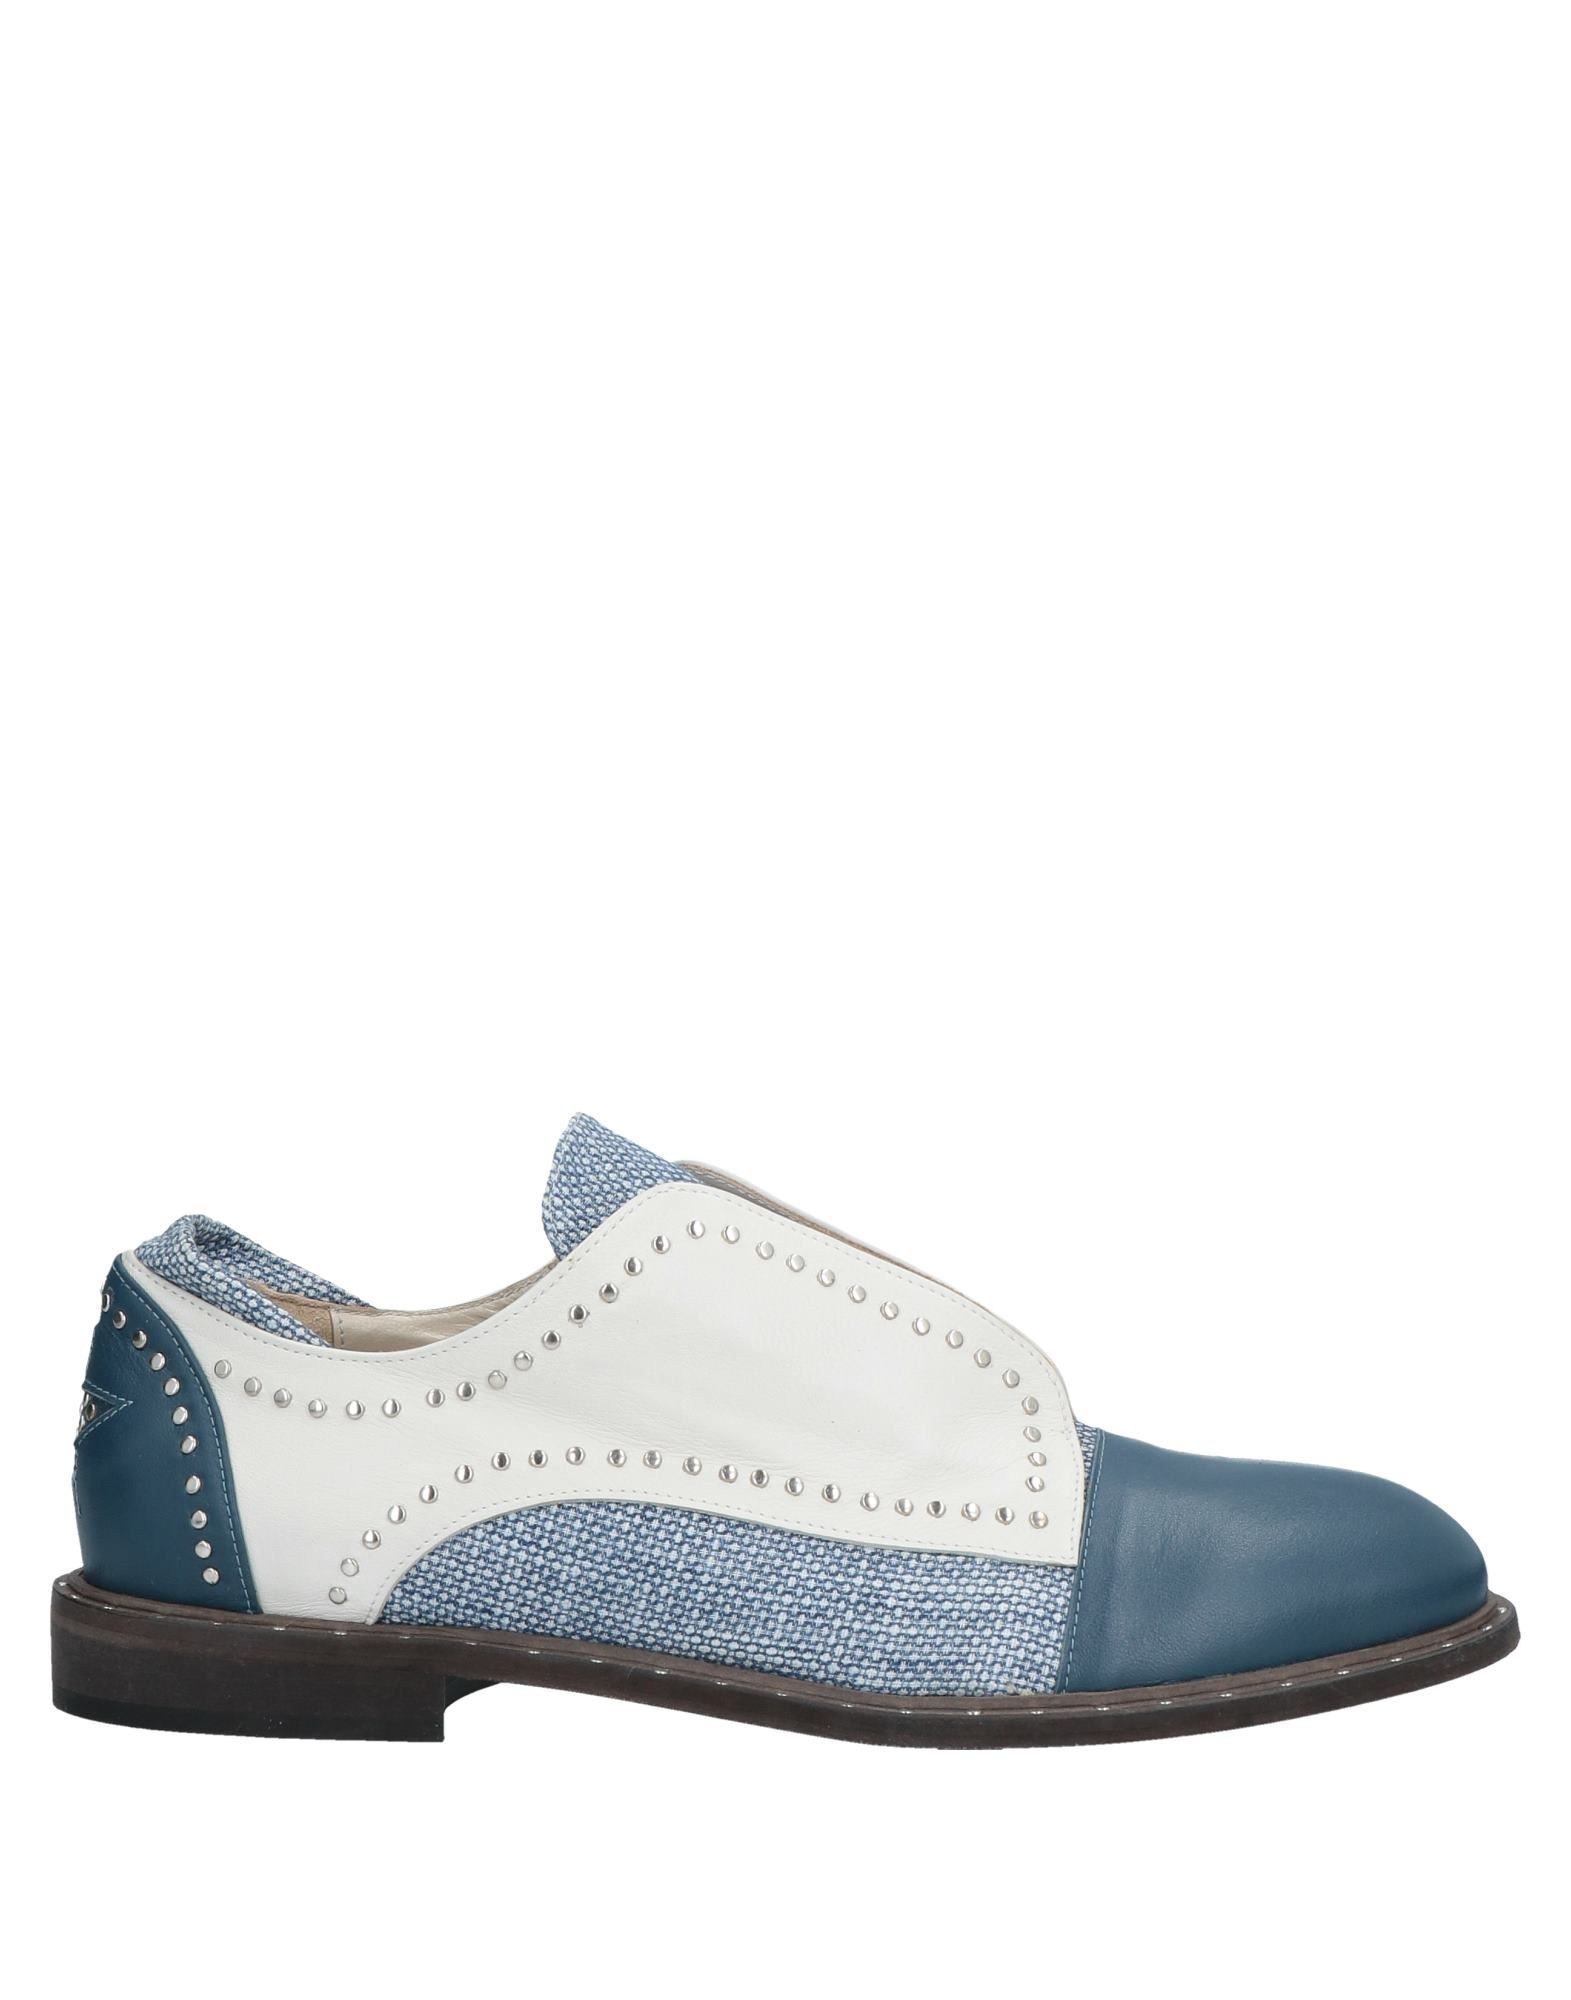 Lorena Antoniazzi Loafers In Blue